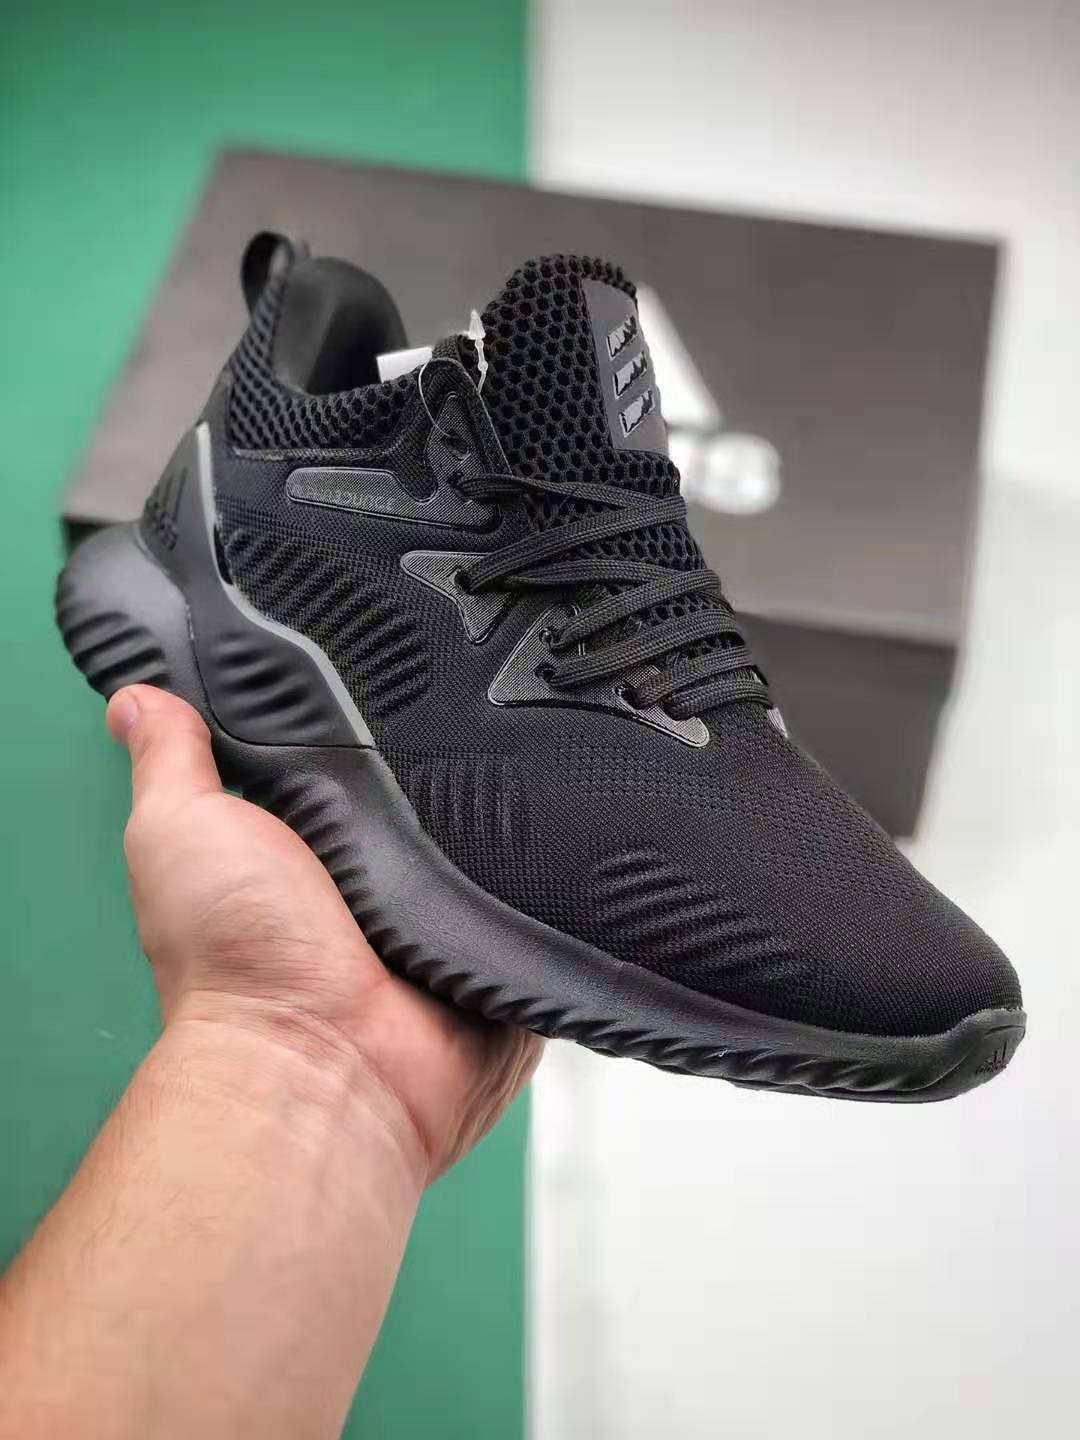 Adidas Alphabounce Beyond Core Black Shoes AC8271 - Ultimate Performance and Style